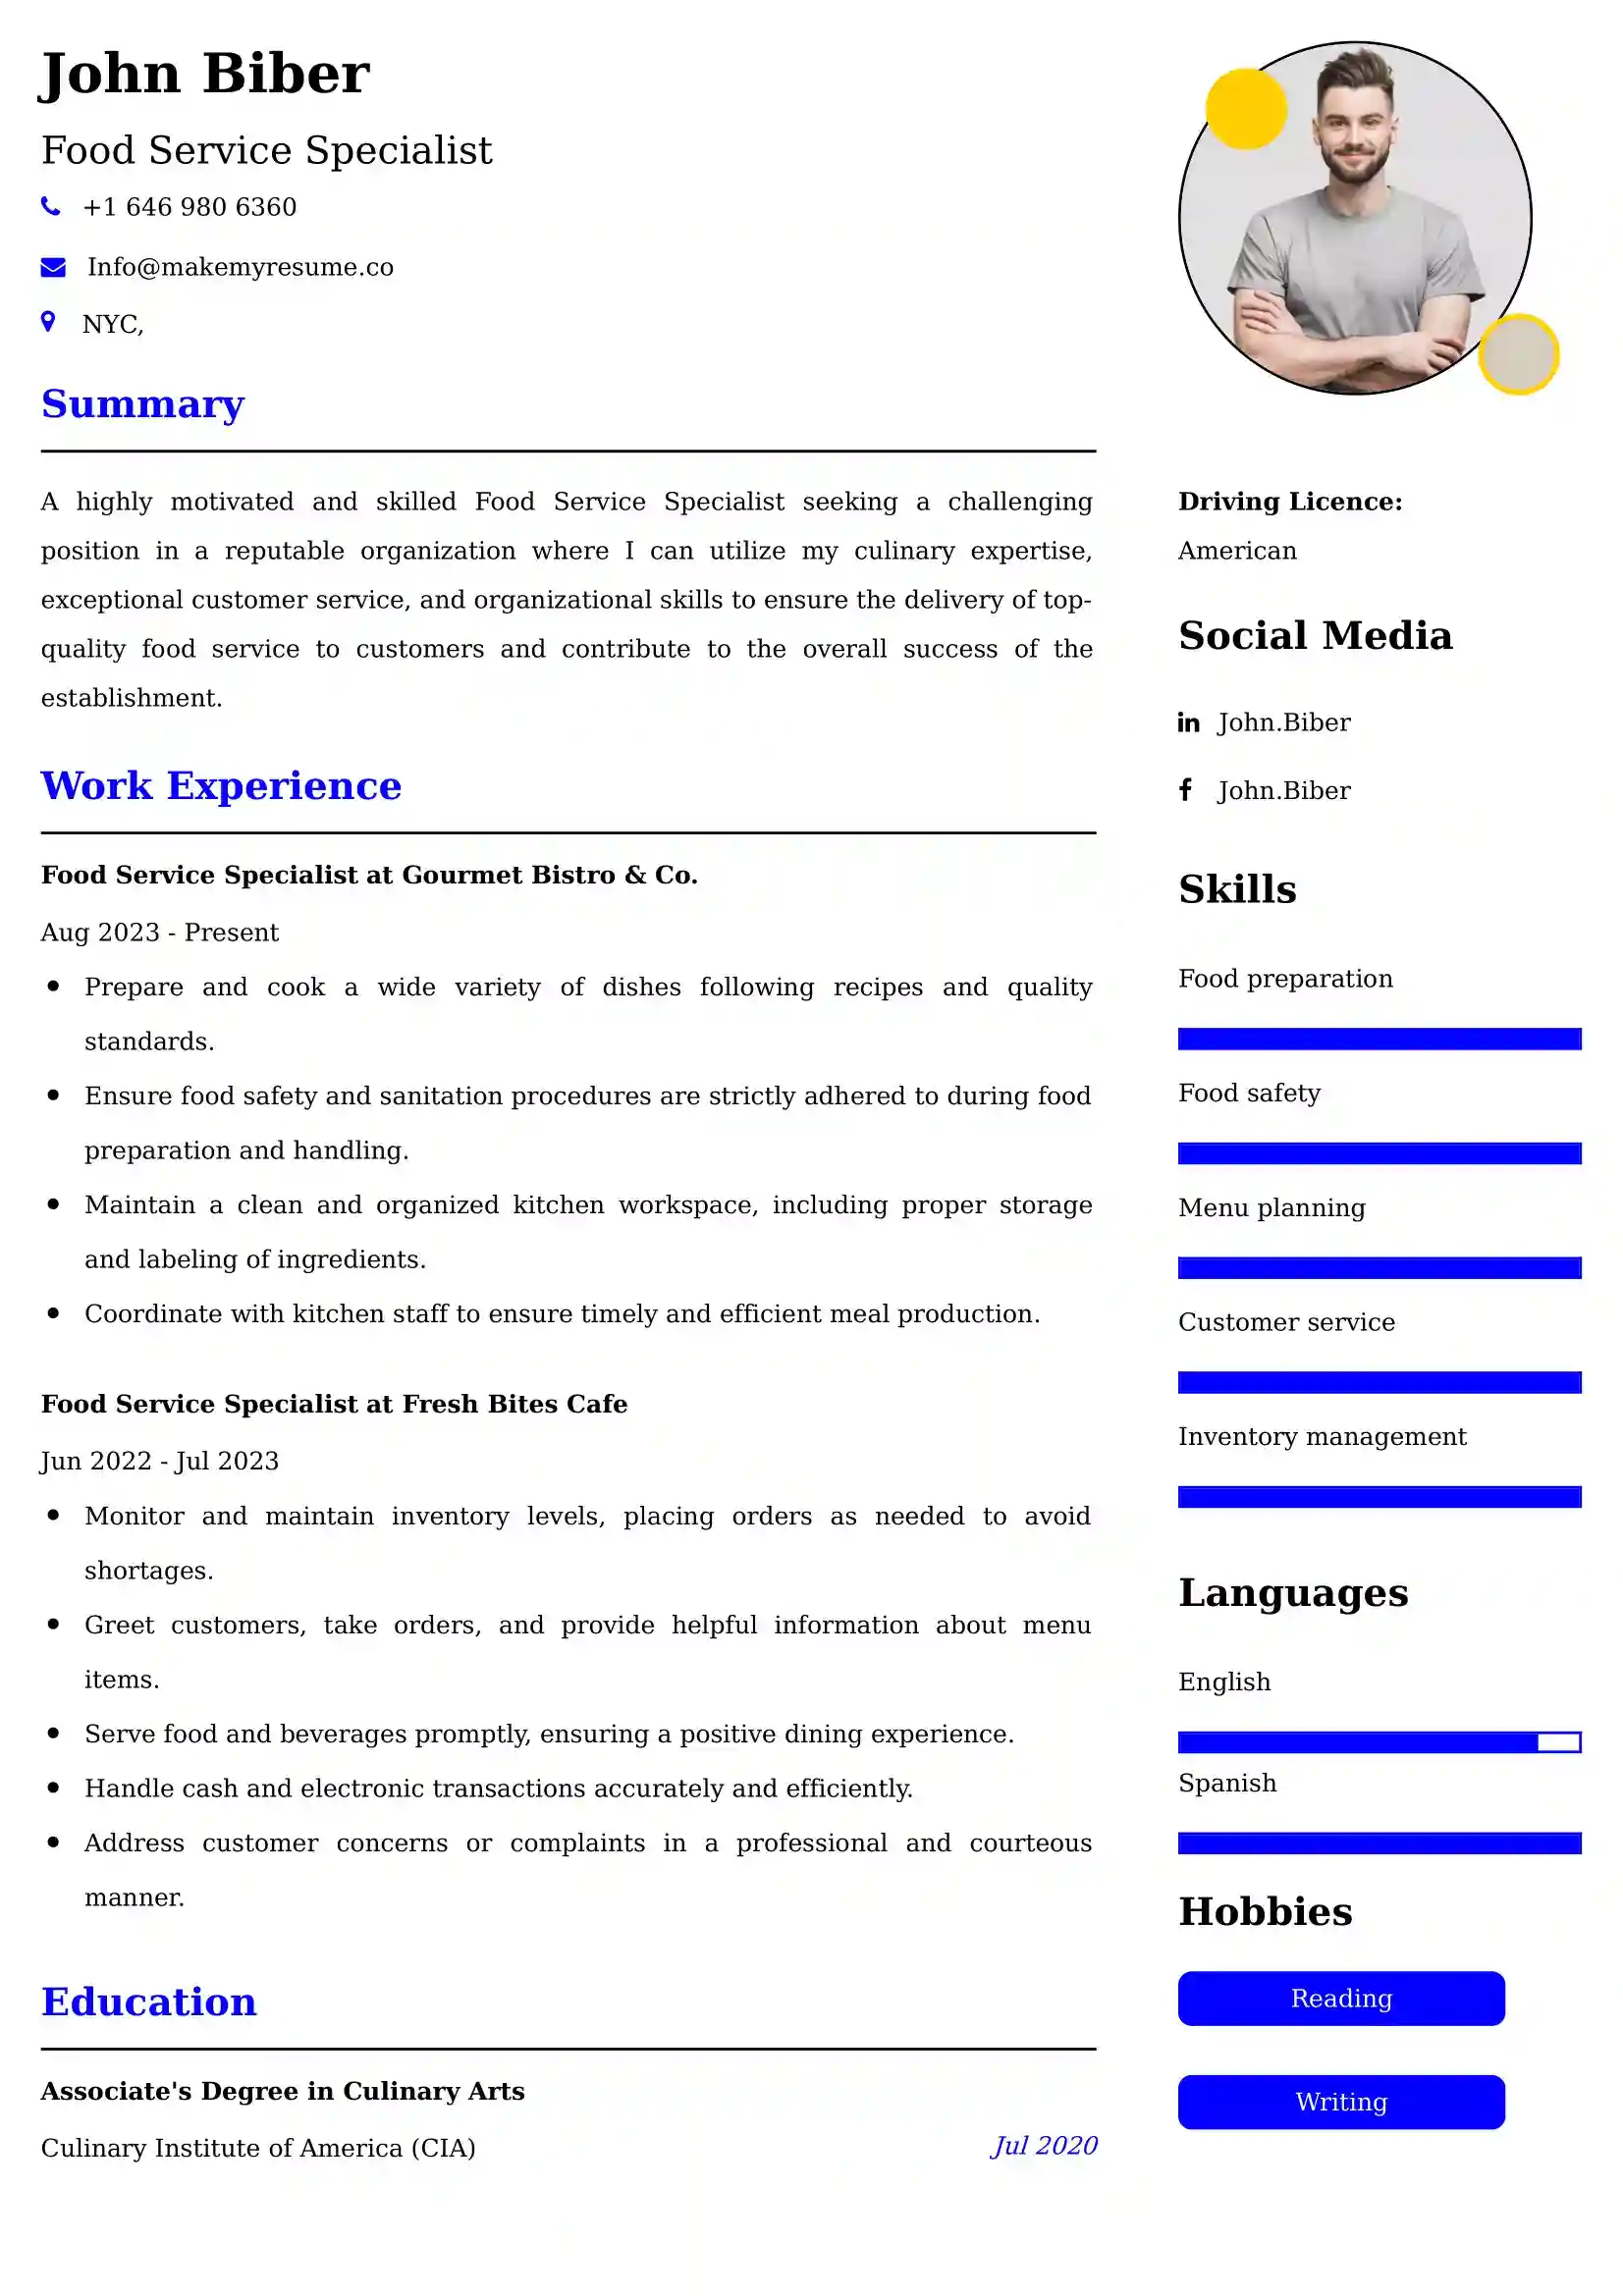 Food Service Specialist Resume Examples - Australian Format and Tips